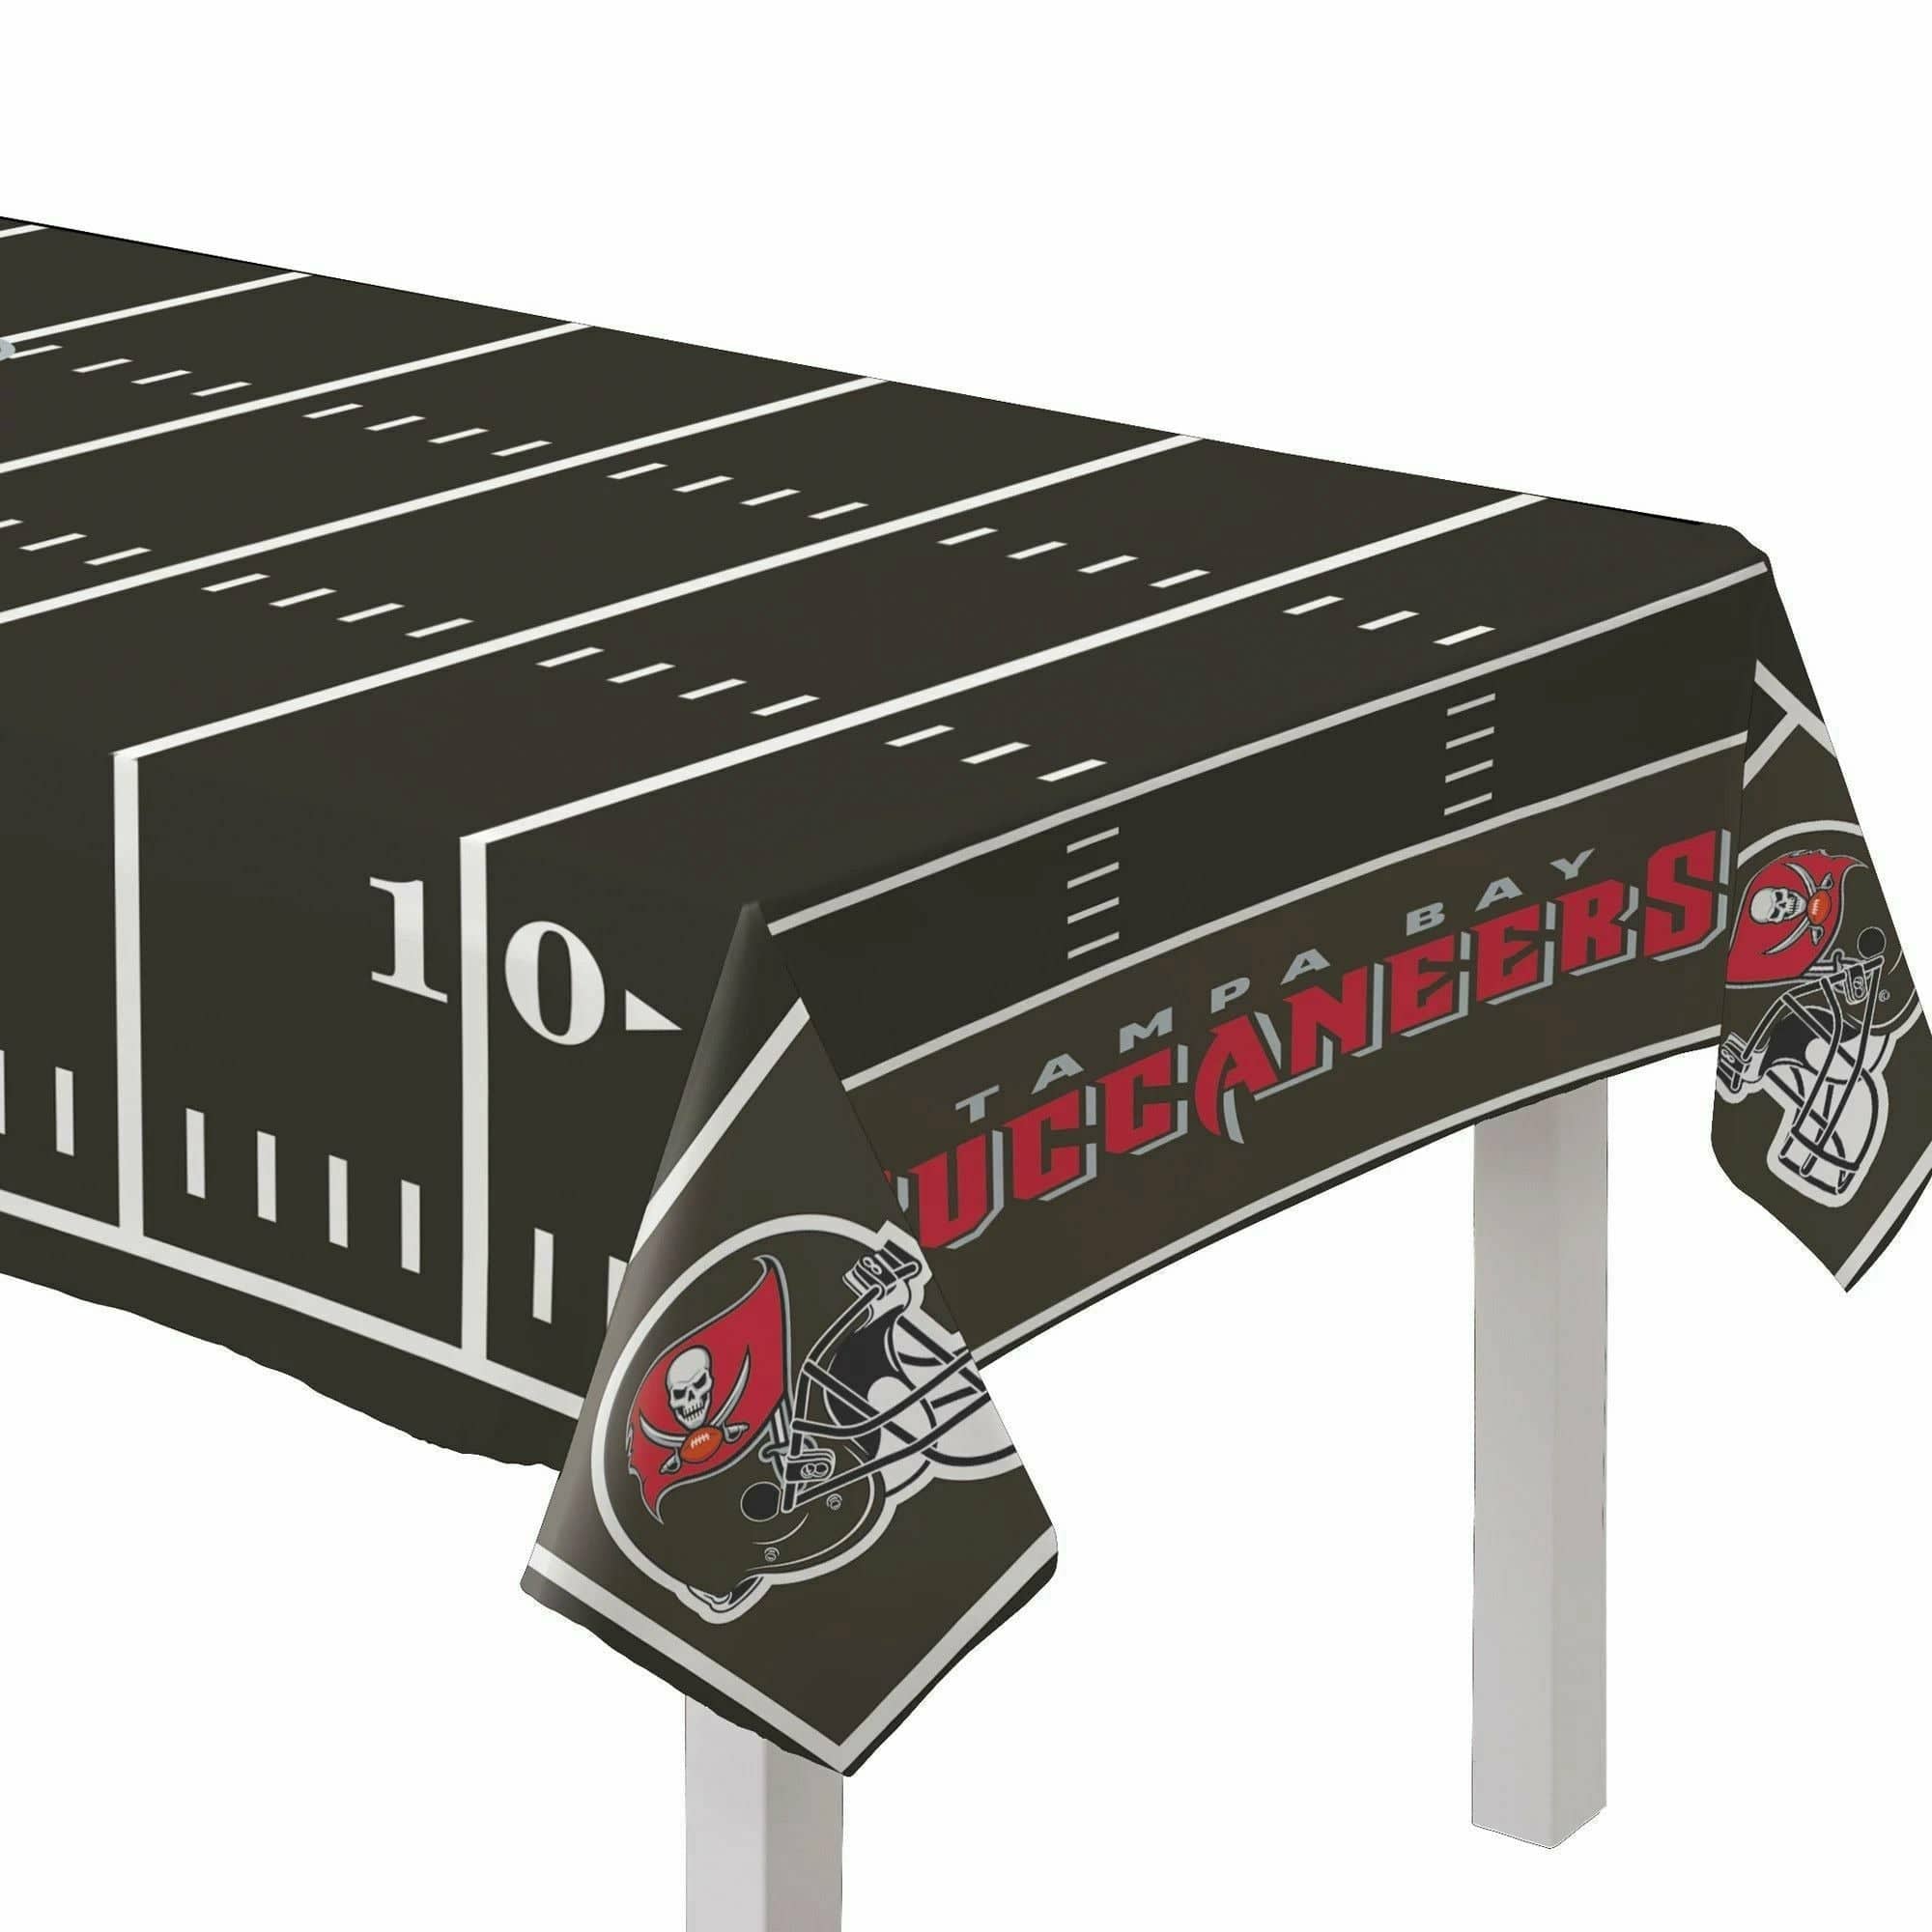 Amscan THEME: SPORTS Tampa Bay Buccaneers Plastic Table Cover - All Over Print